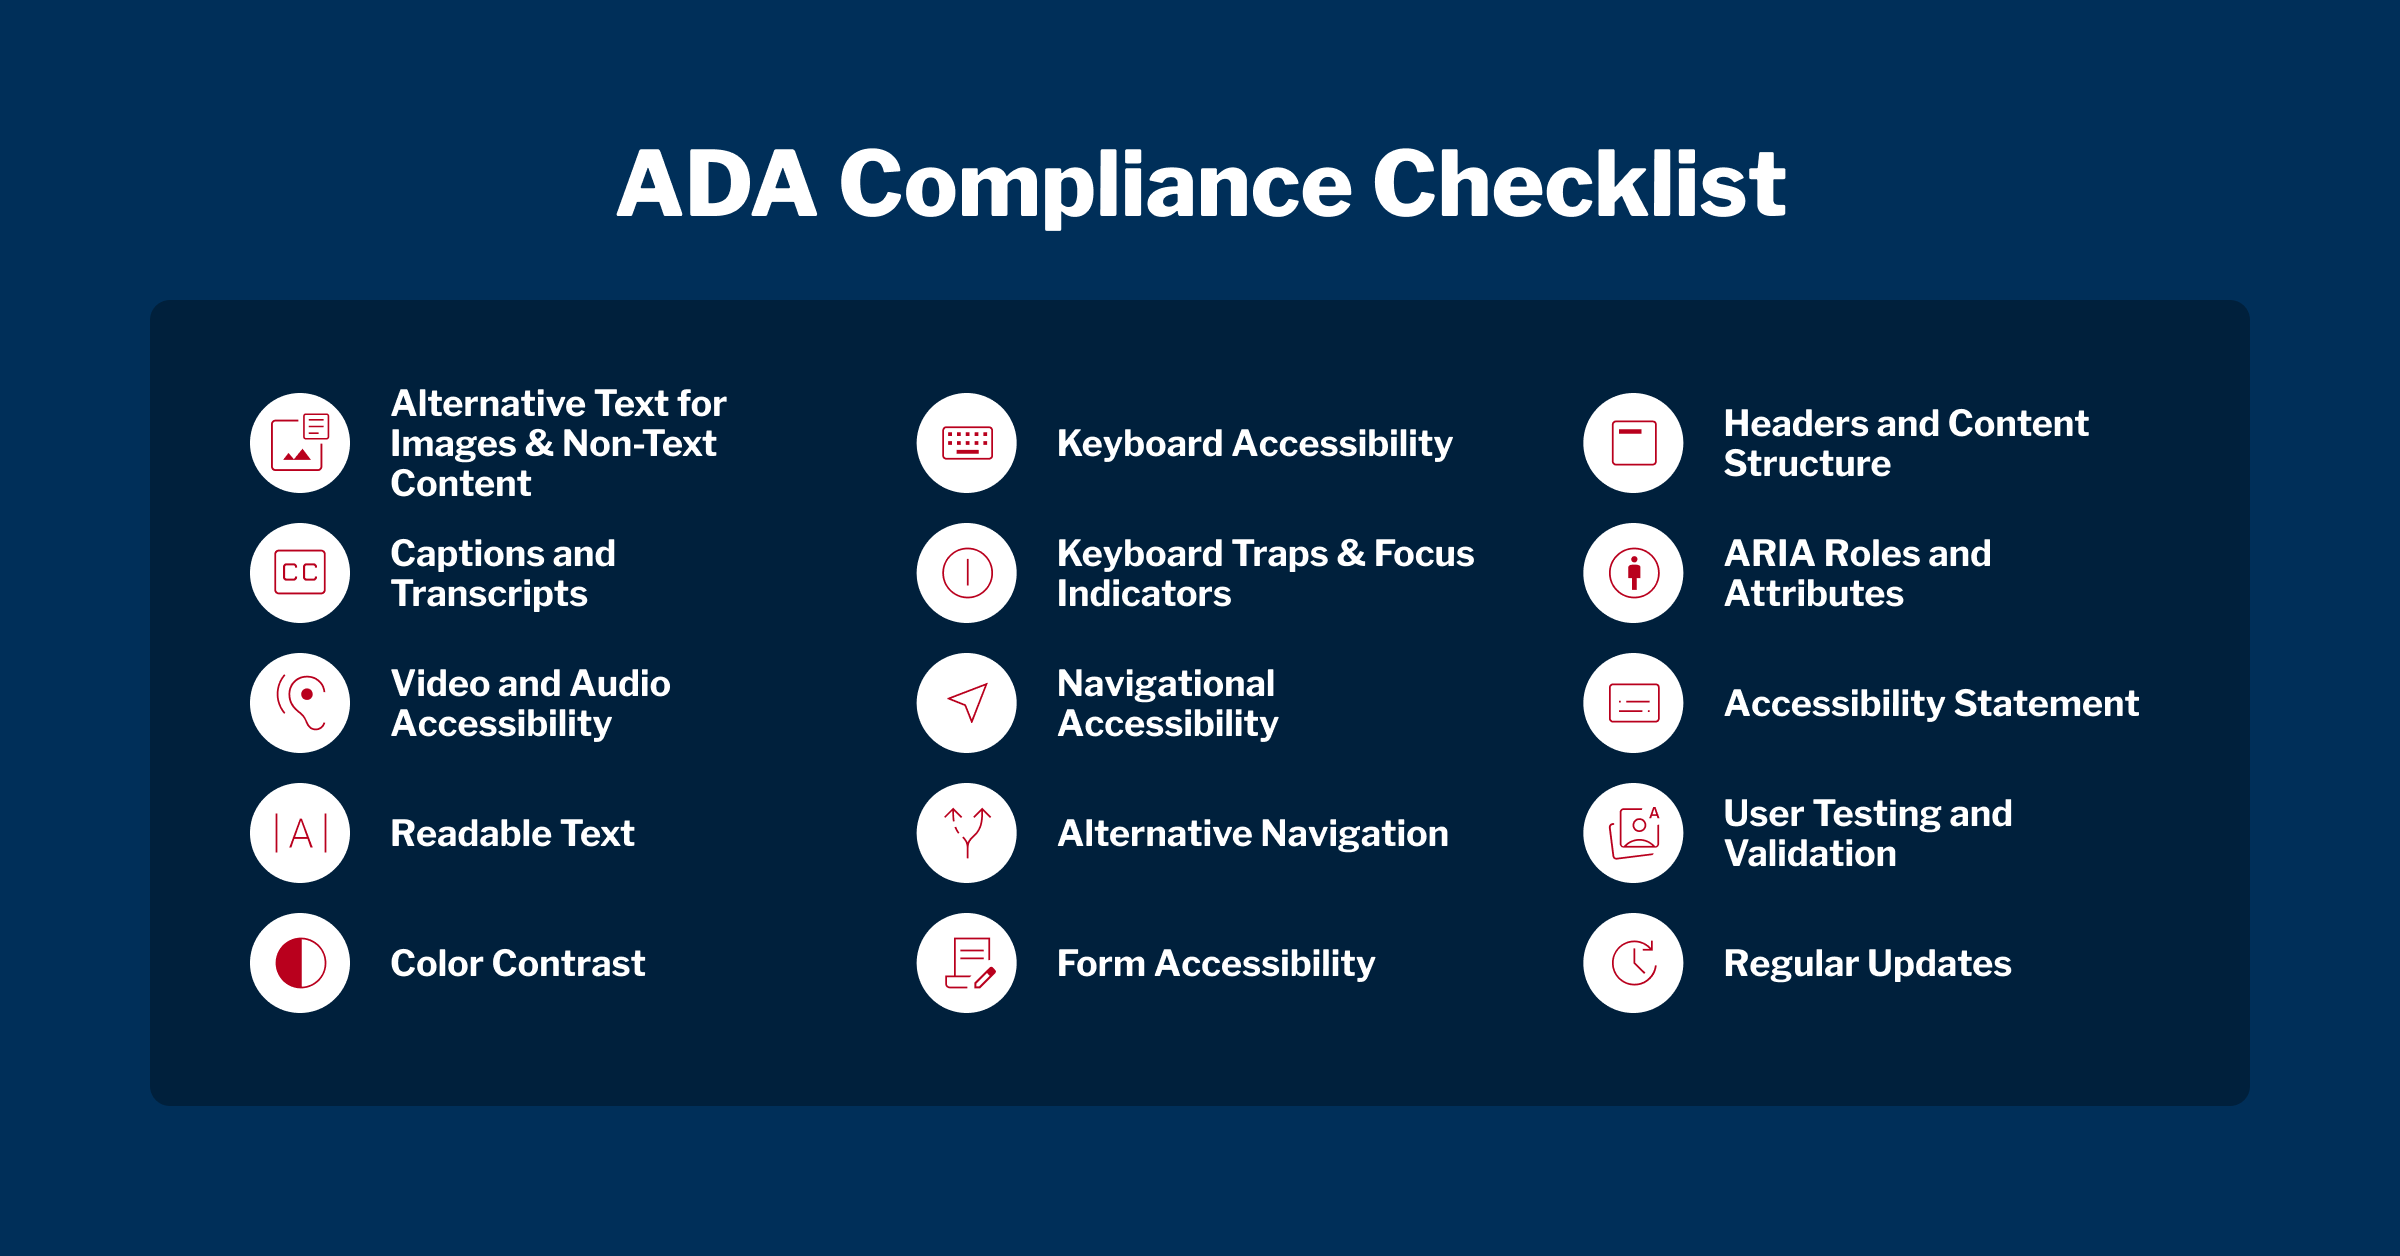 Graphic of an ADA compliance checklist with categories such as alternative text, captions, keyboard accessibility, and color contrast.